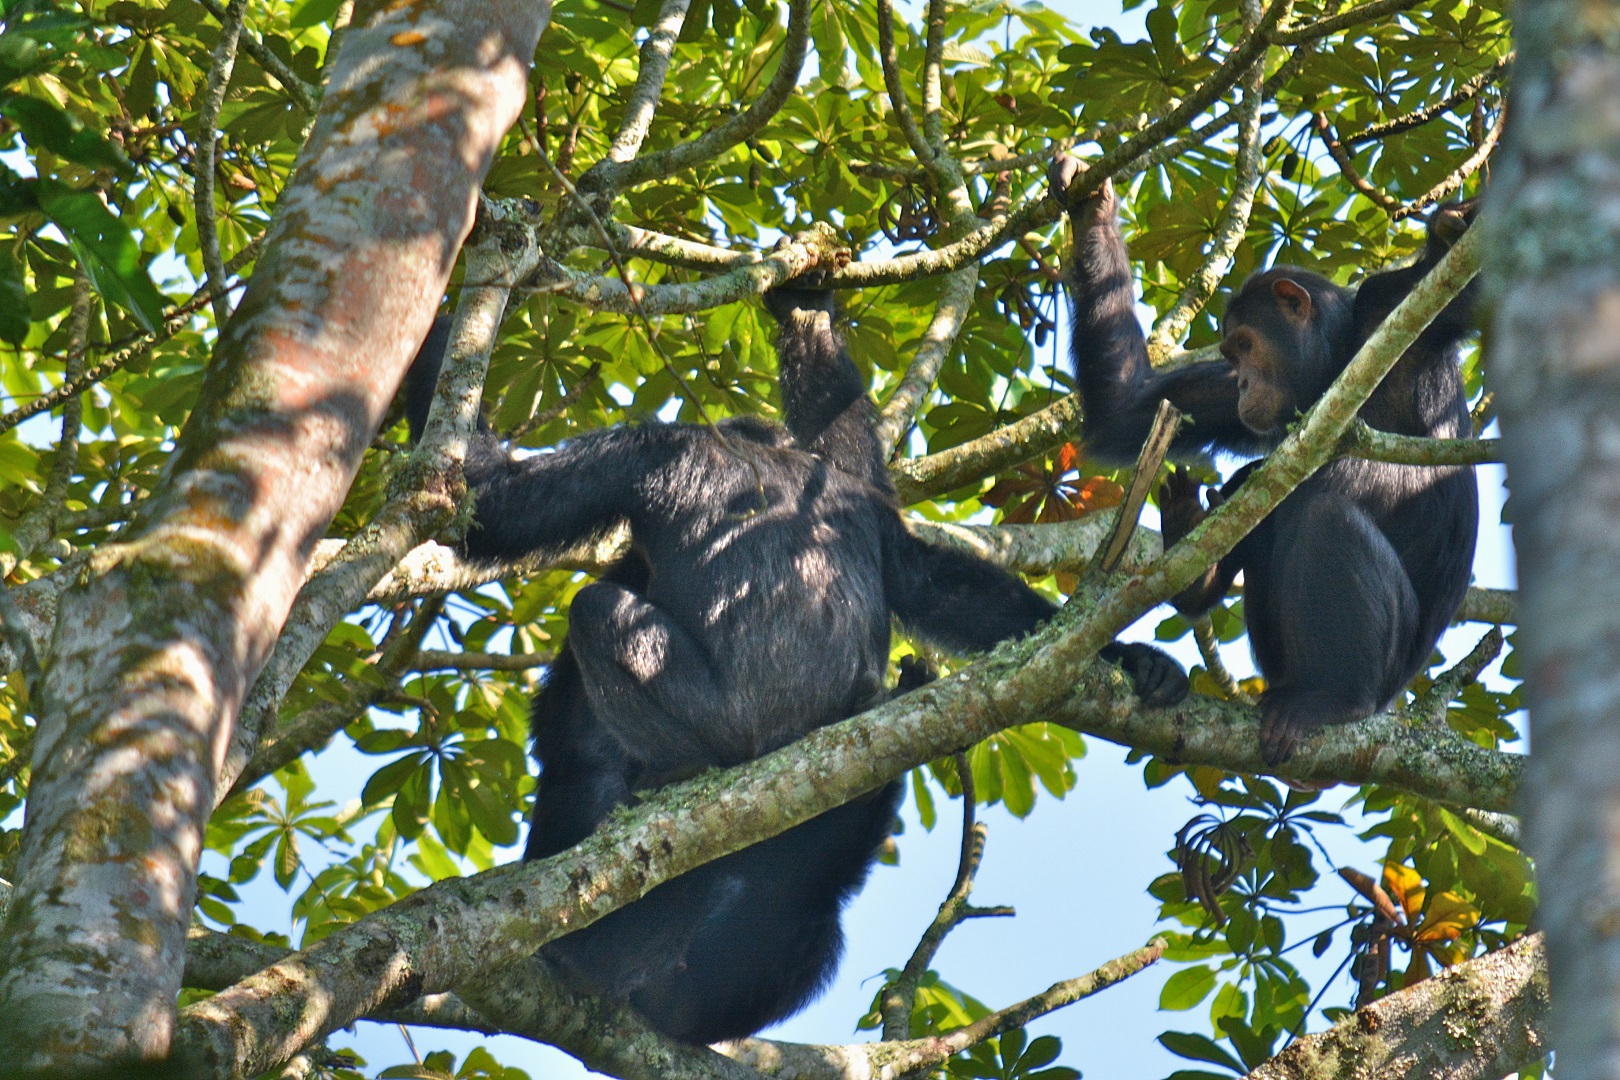 Playful chimpanzees on top of a tree in Kyambura Gorge